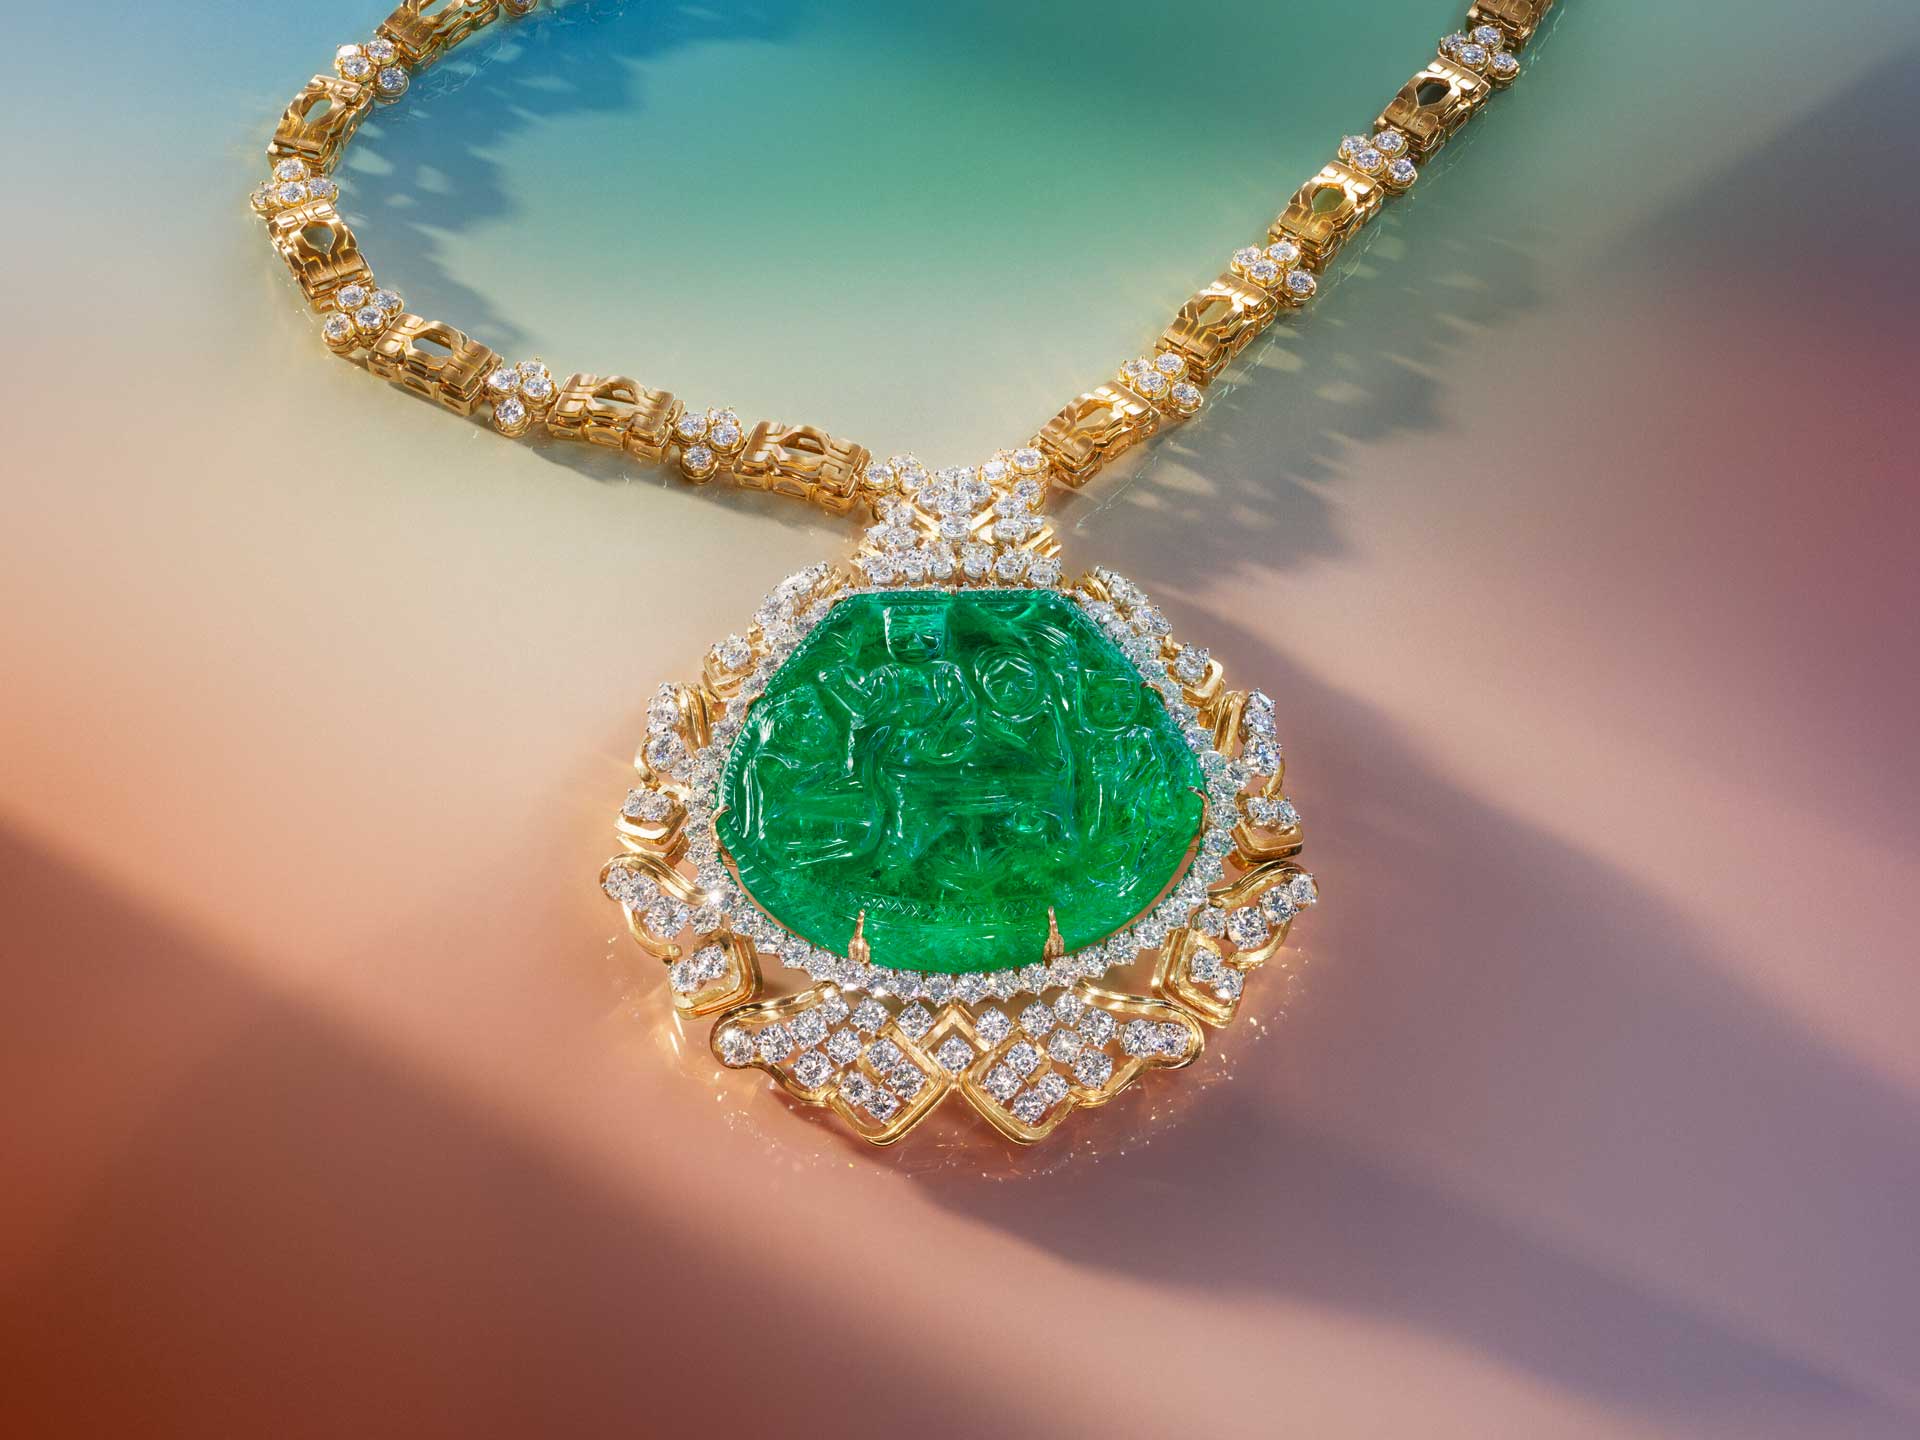 The World's Most Valuable Jewelry Collection Is Coming to Auction in May -  Galerie